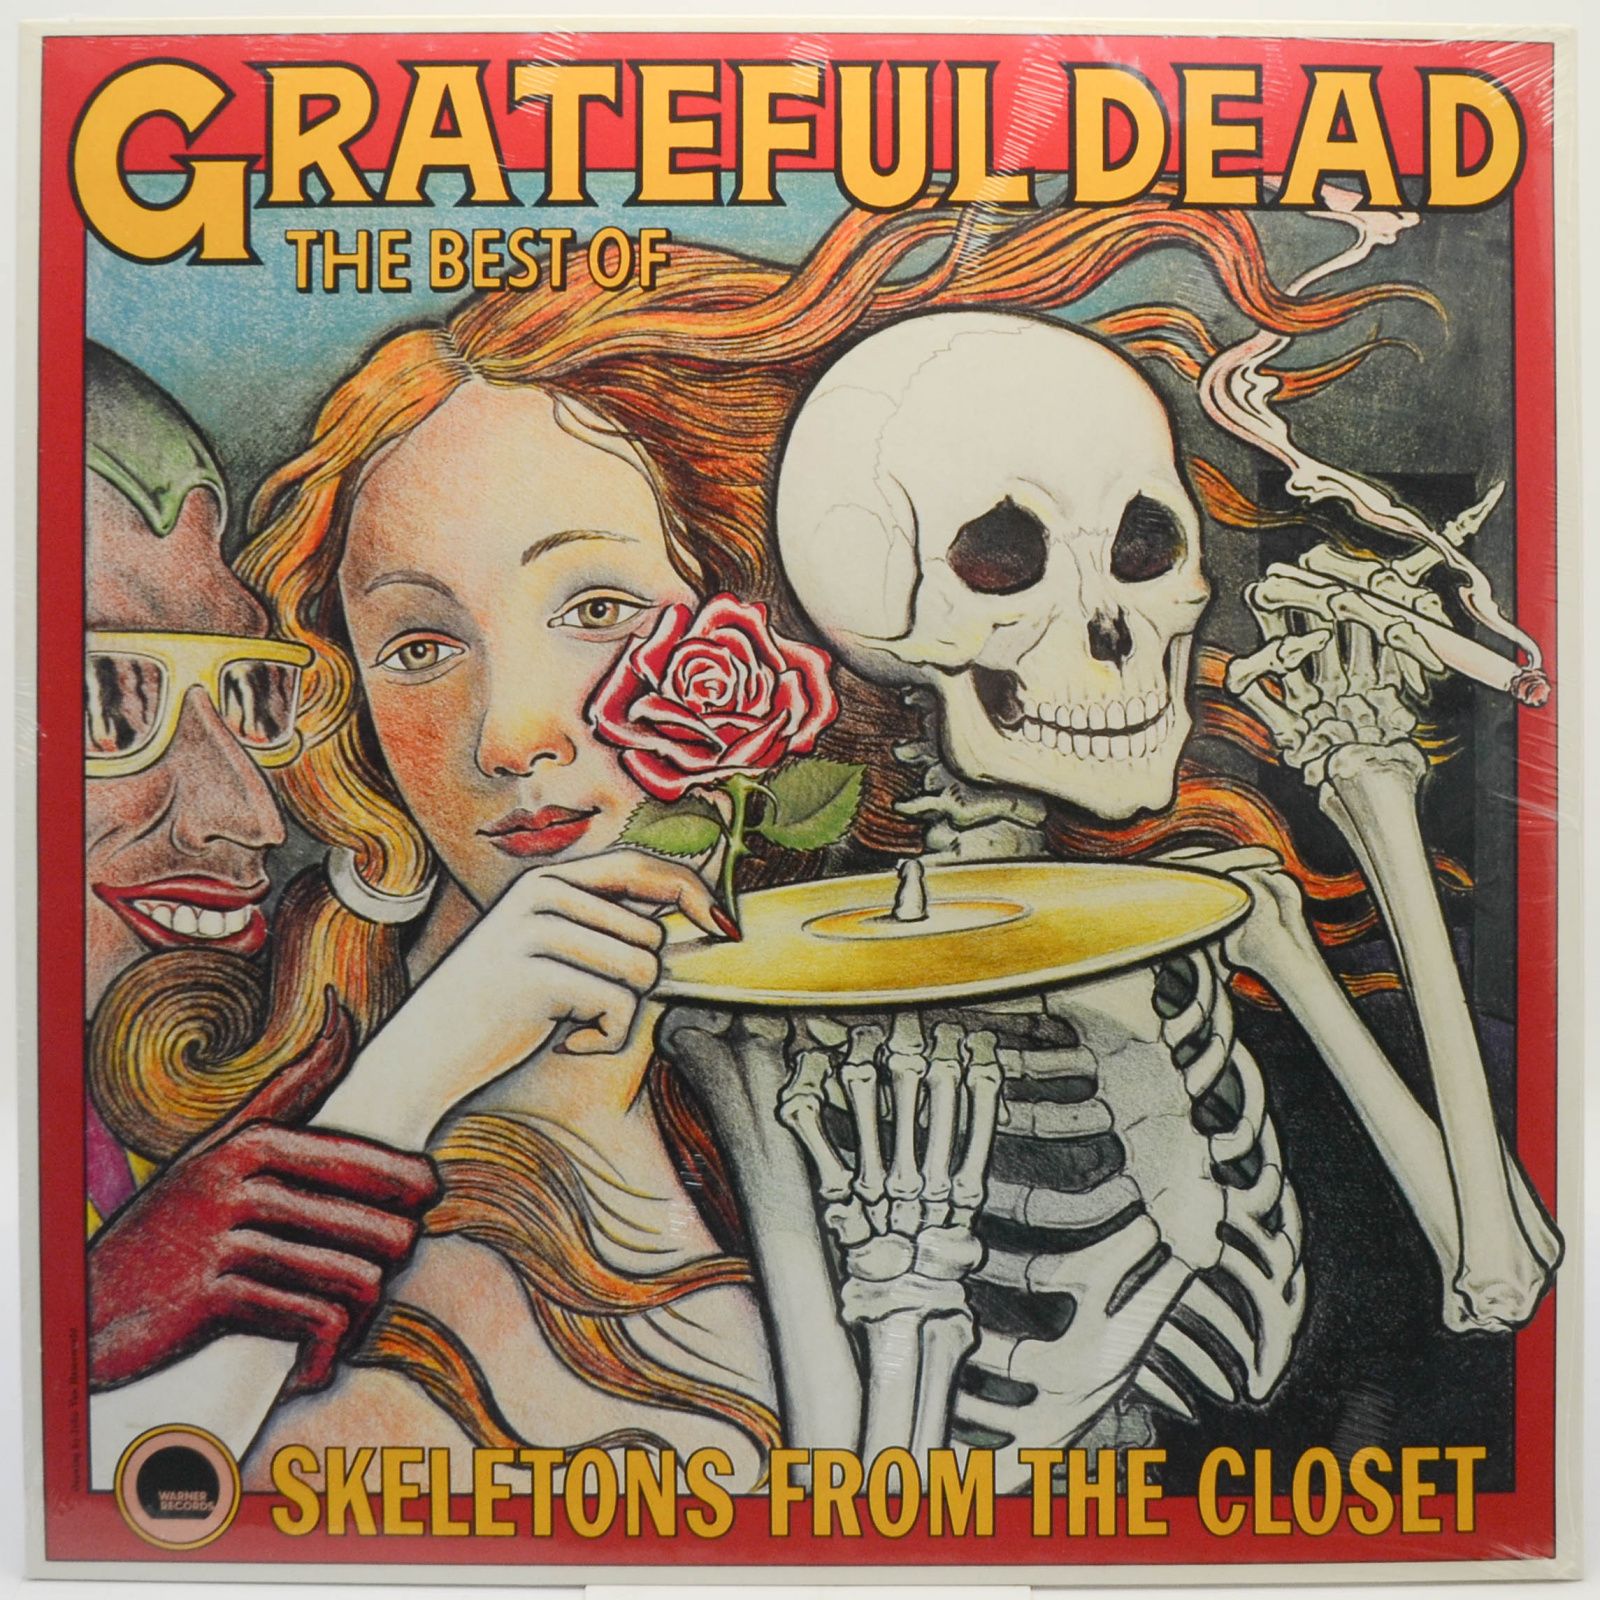 The Best Of Skeletons From The Closet, 1974